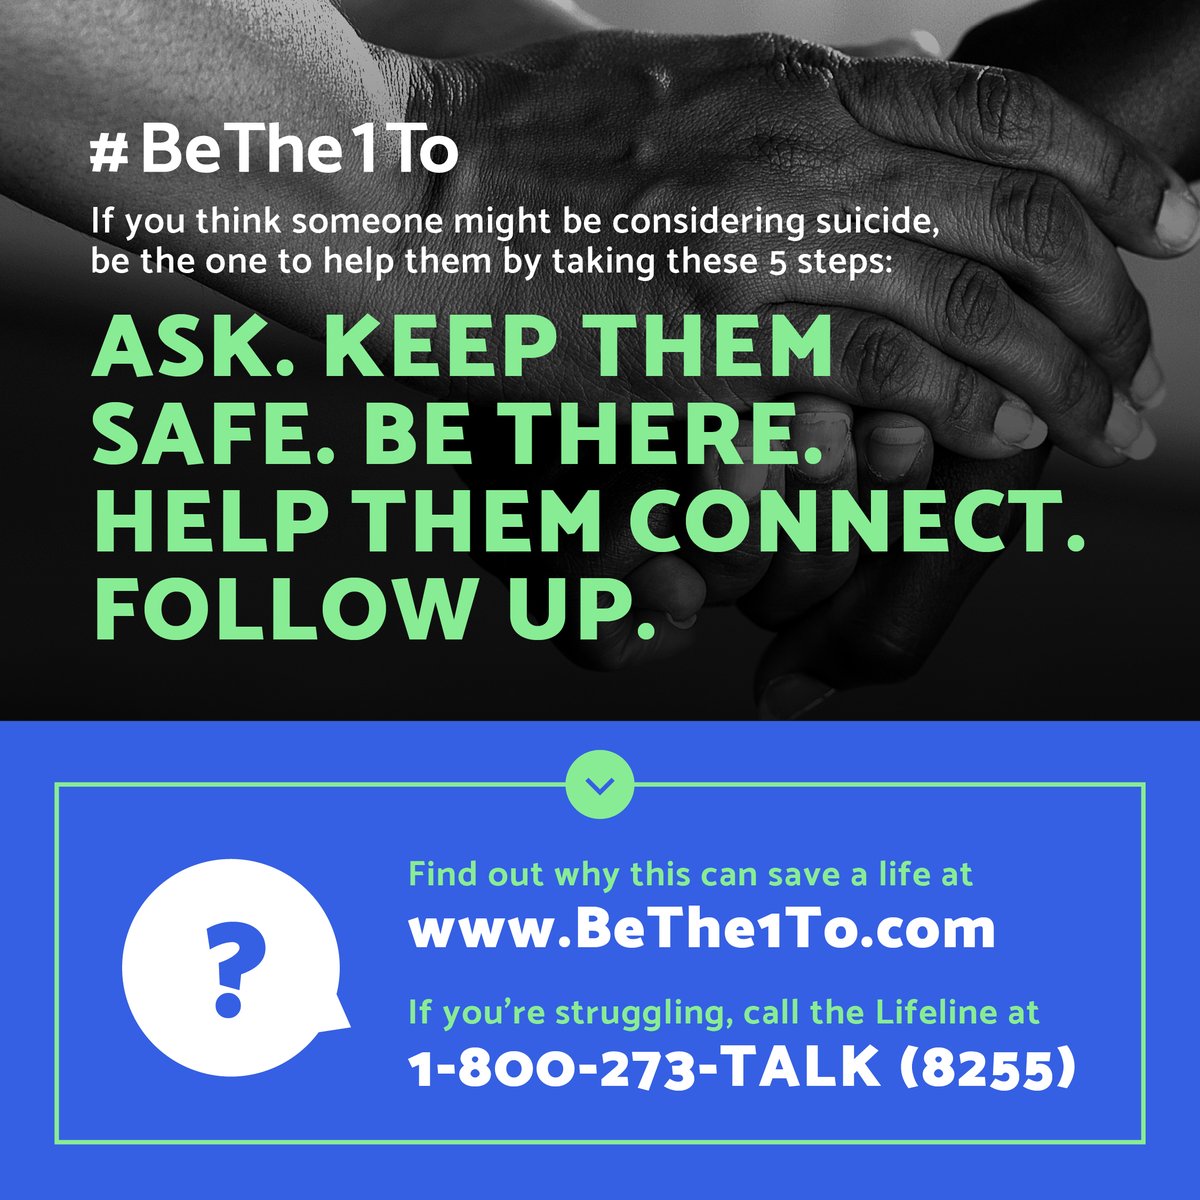 Suicide Prevention Month may be over, but don't forget to still be the one!

+ Ask
+ Keep them safe
+ Be there
+ Help them connect
+ Follow up

#AskListenRefer #PreventionWorks #PreventionMatters #SuicidePrevention #MentalHealth #YouMatter #SPM20 #BeThe1To